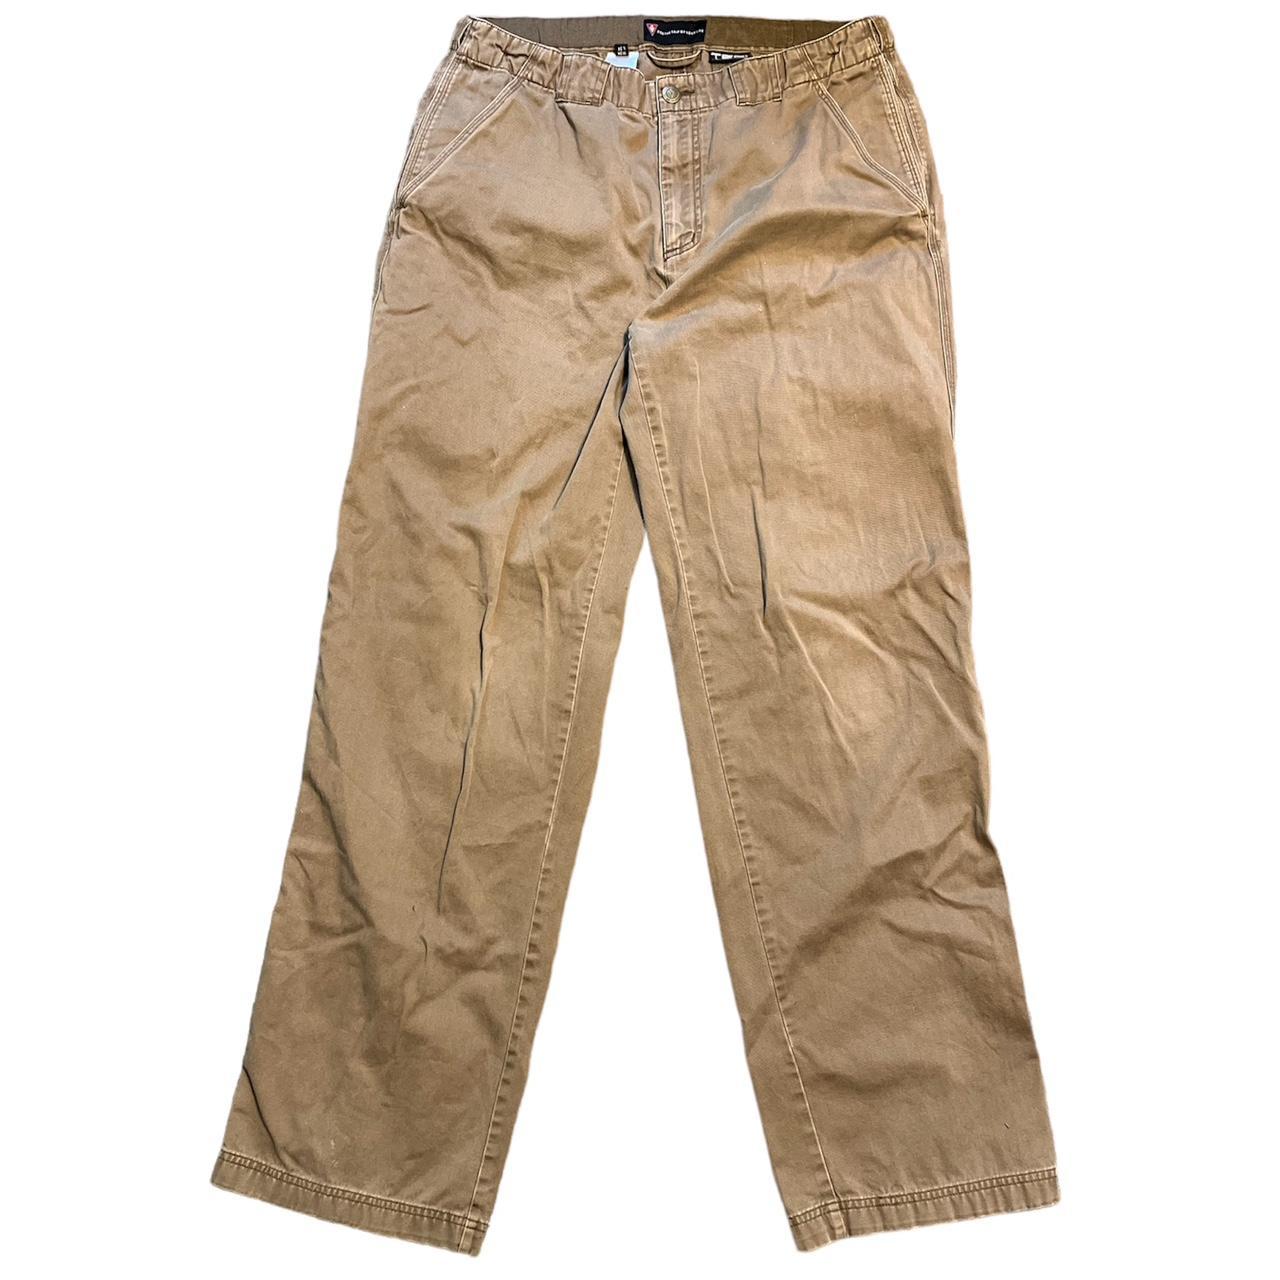 Men's Hiking Pants, Free Delivery